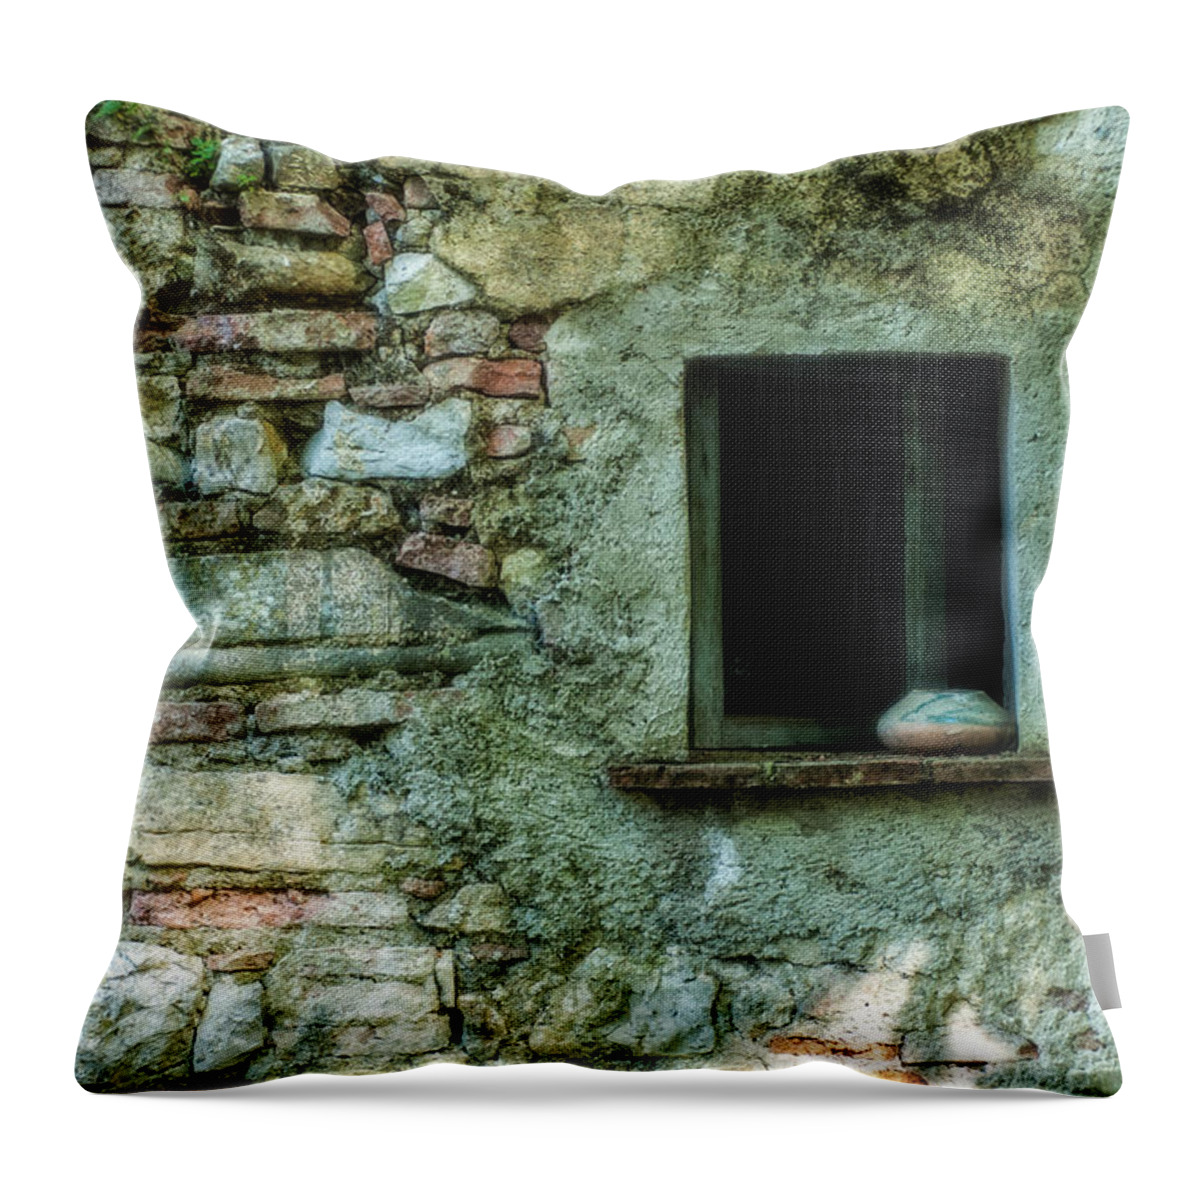 Italy Throw Pillow featuring the photograph Stone Window by George Buxbaum